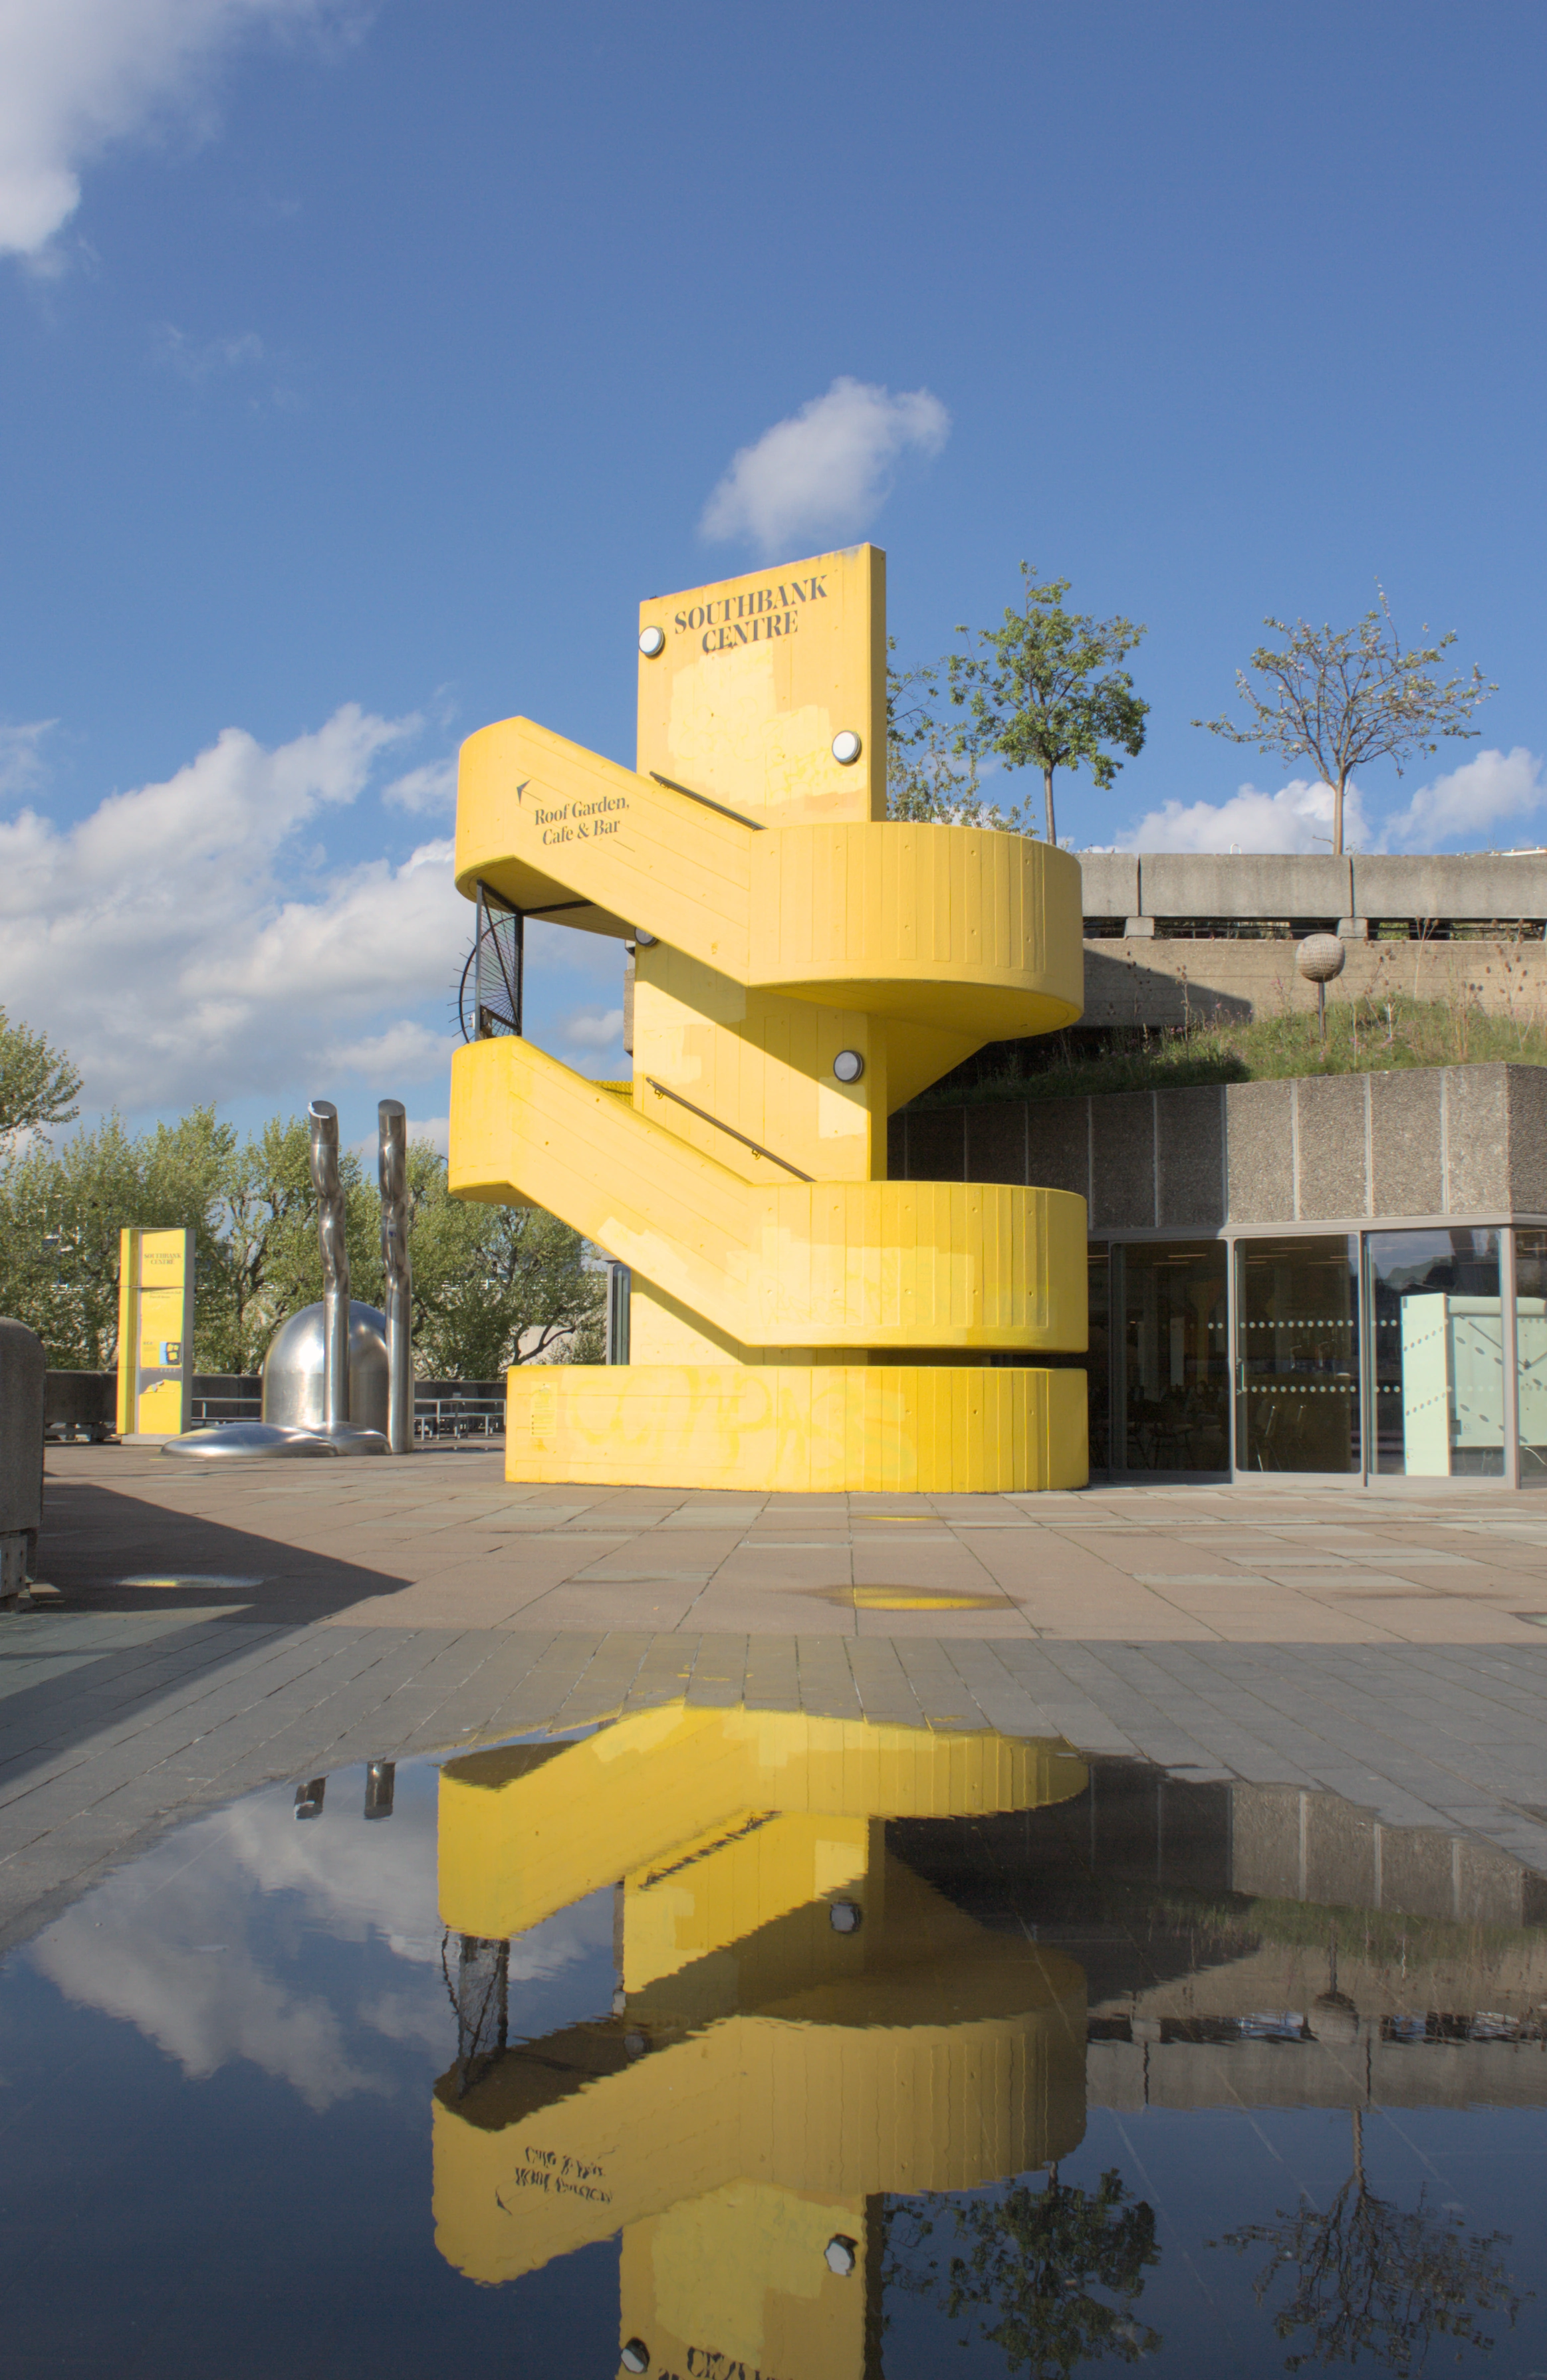 A bright yellow brutalist staircase against a blue sky, reflected in a puddle below